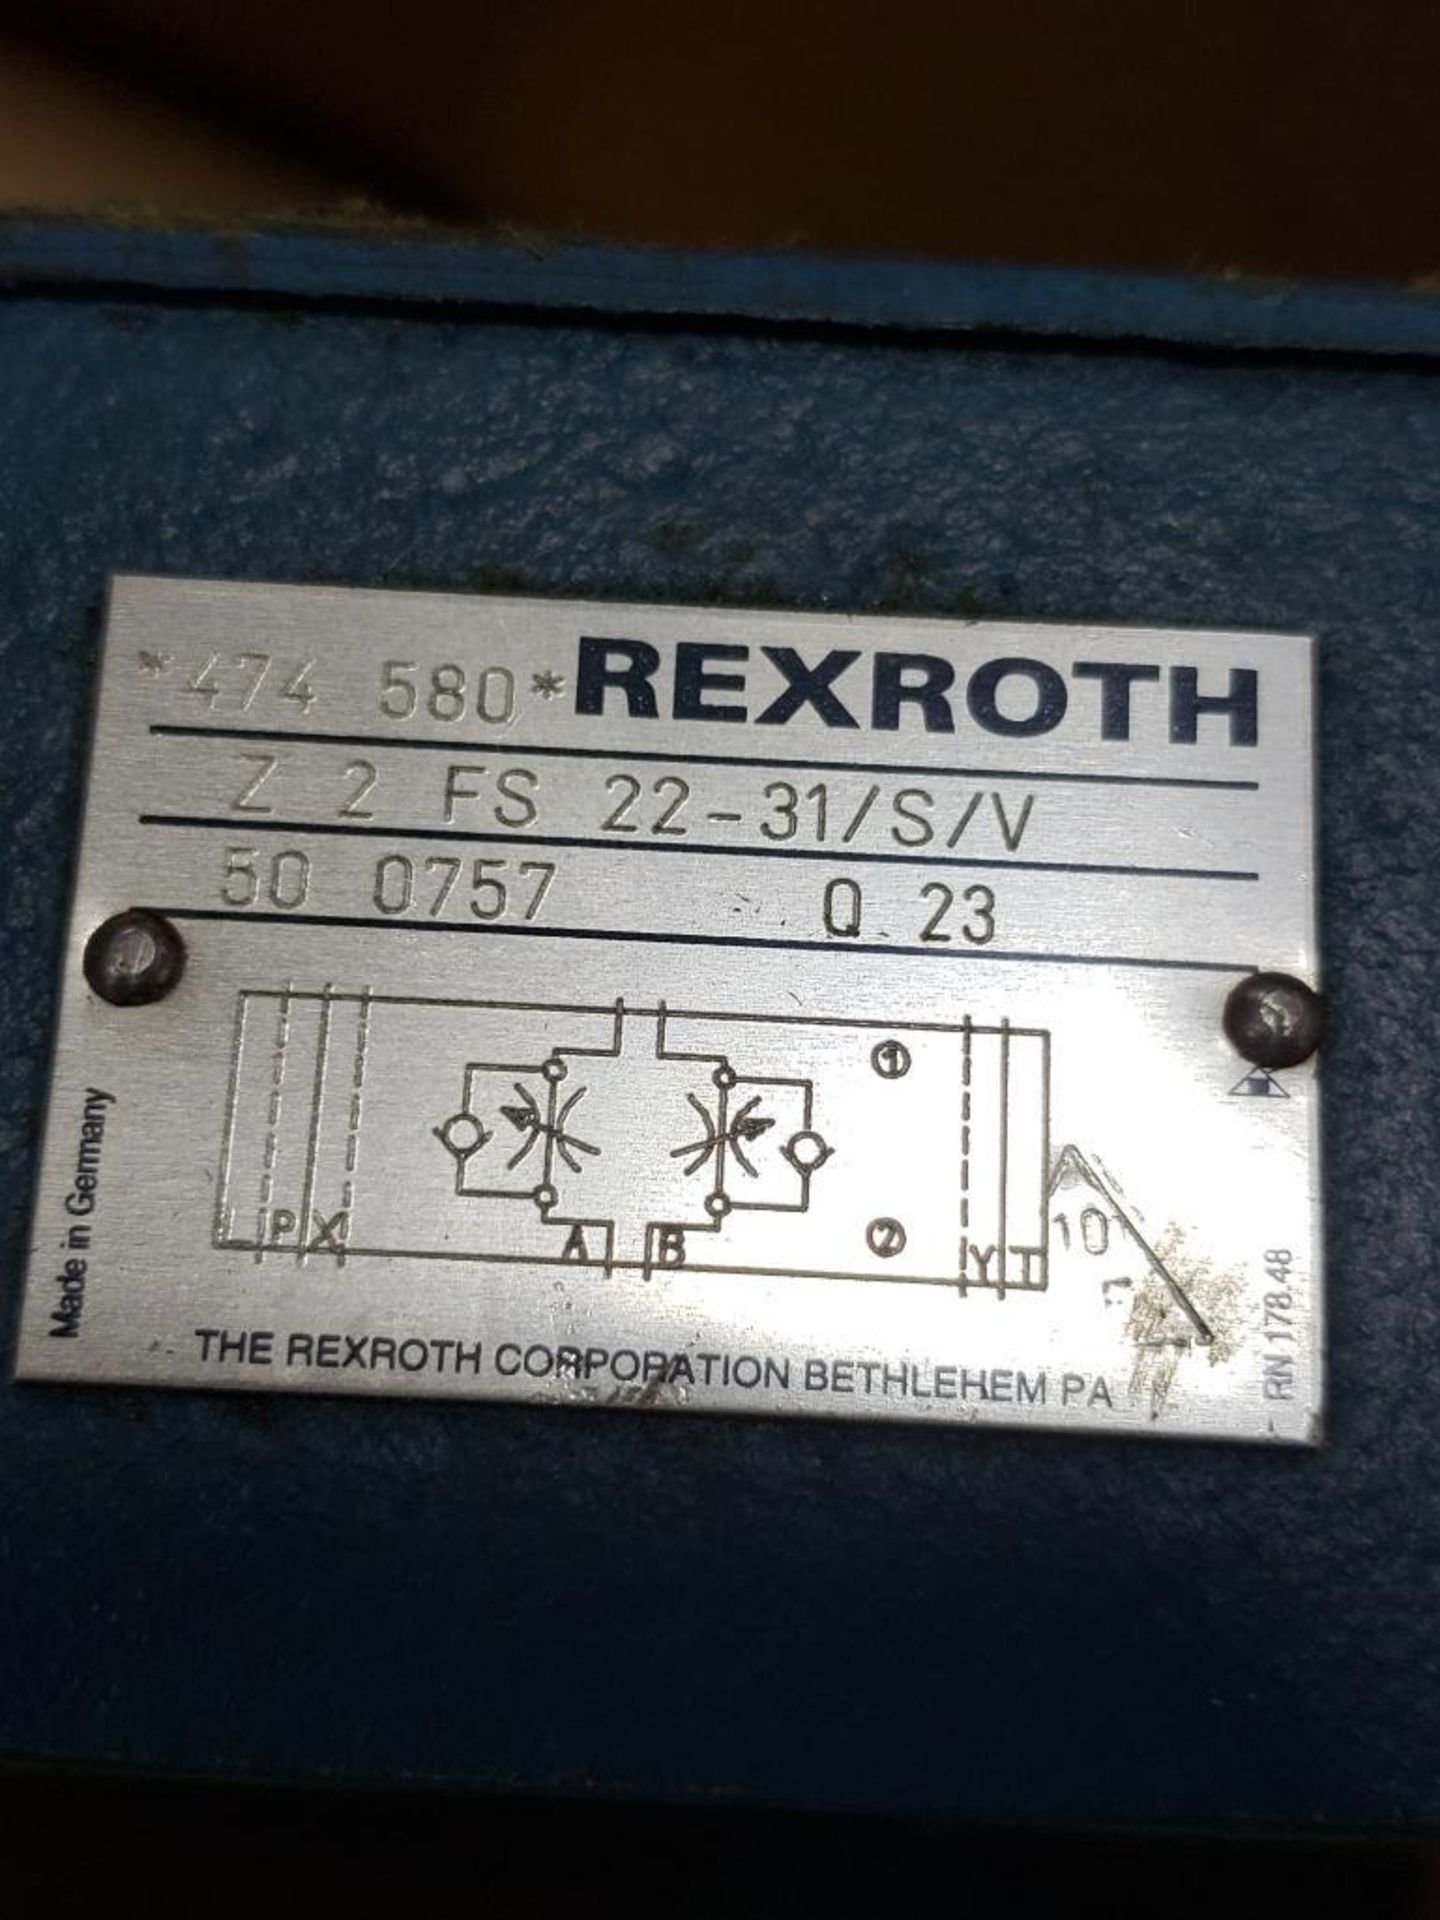 Rexroth hydraulic valve body. Part number Z2FS22-31/S/V. Appears to be new old stock. - Image 2 of 2